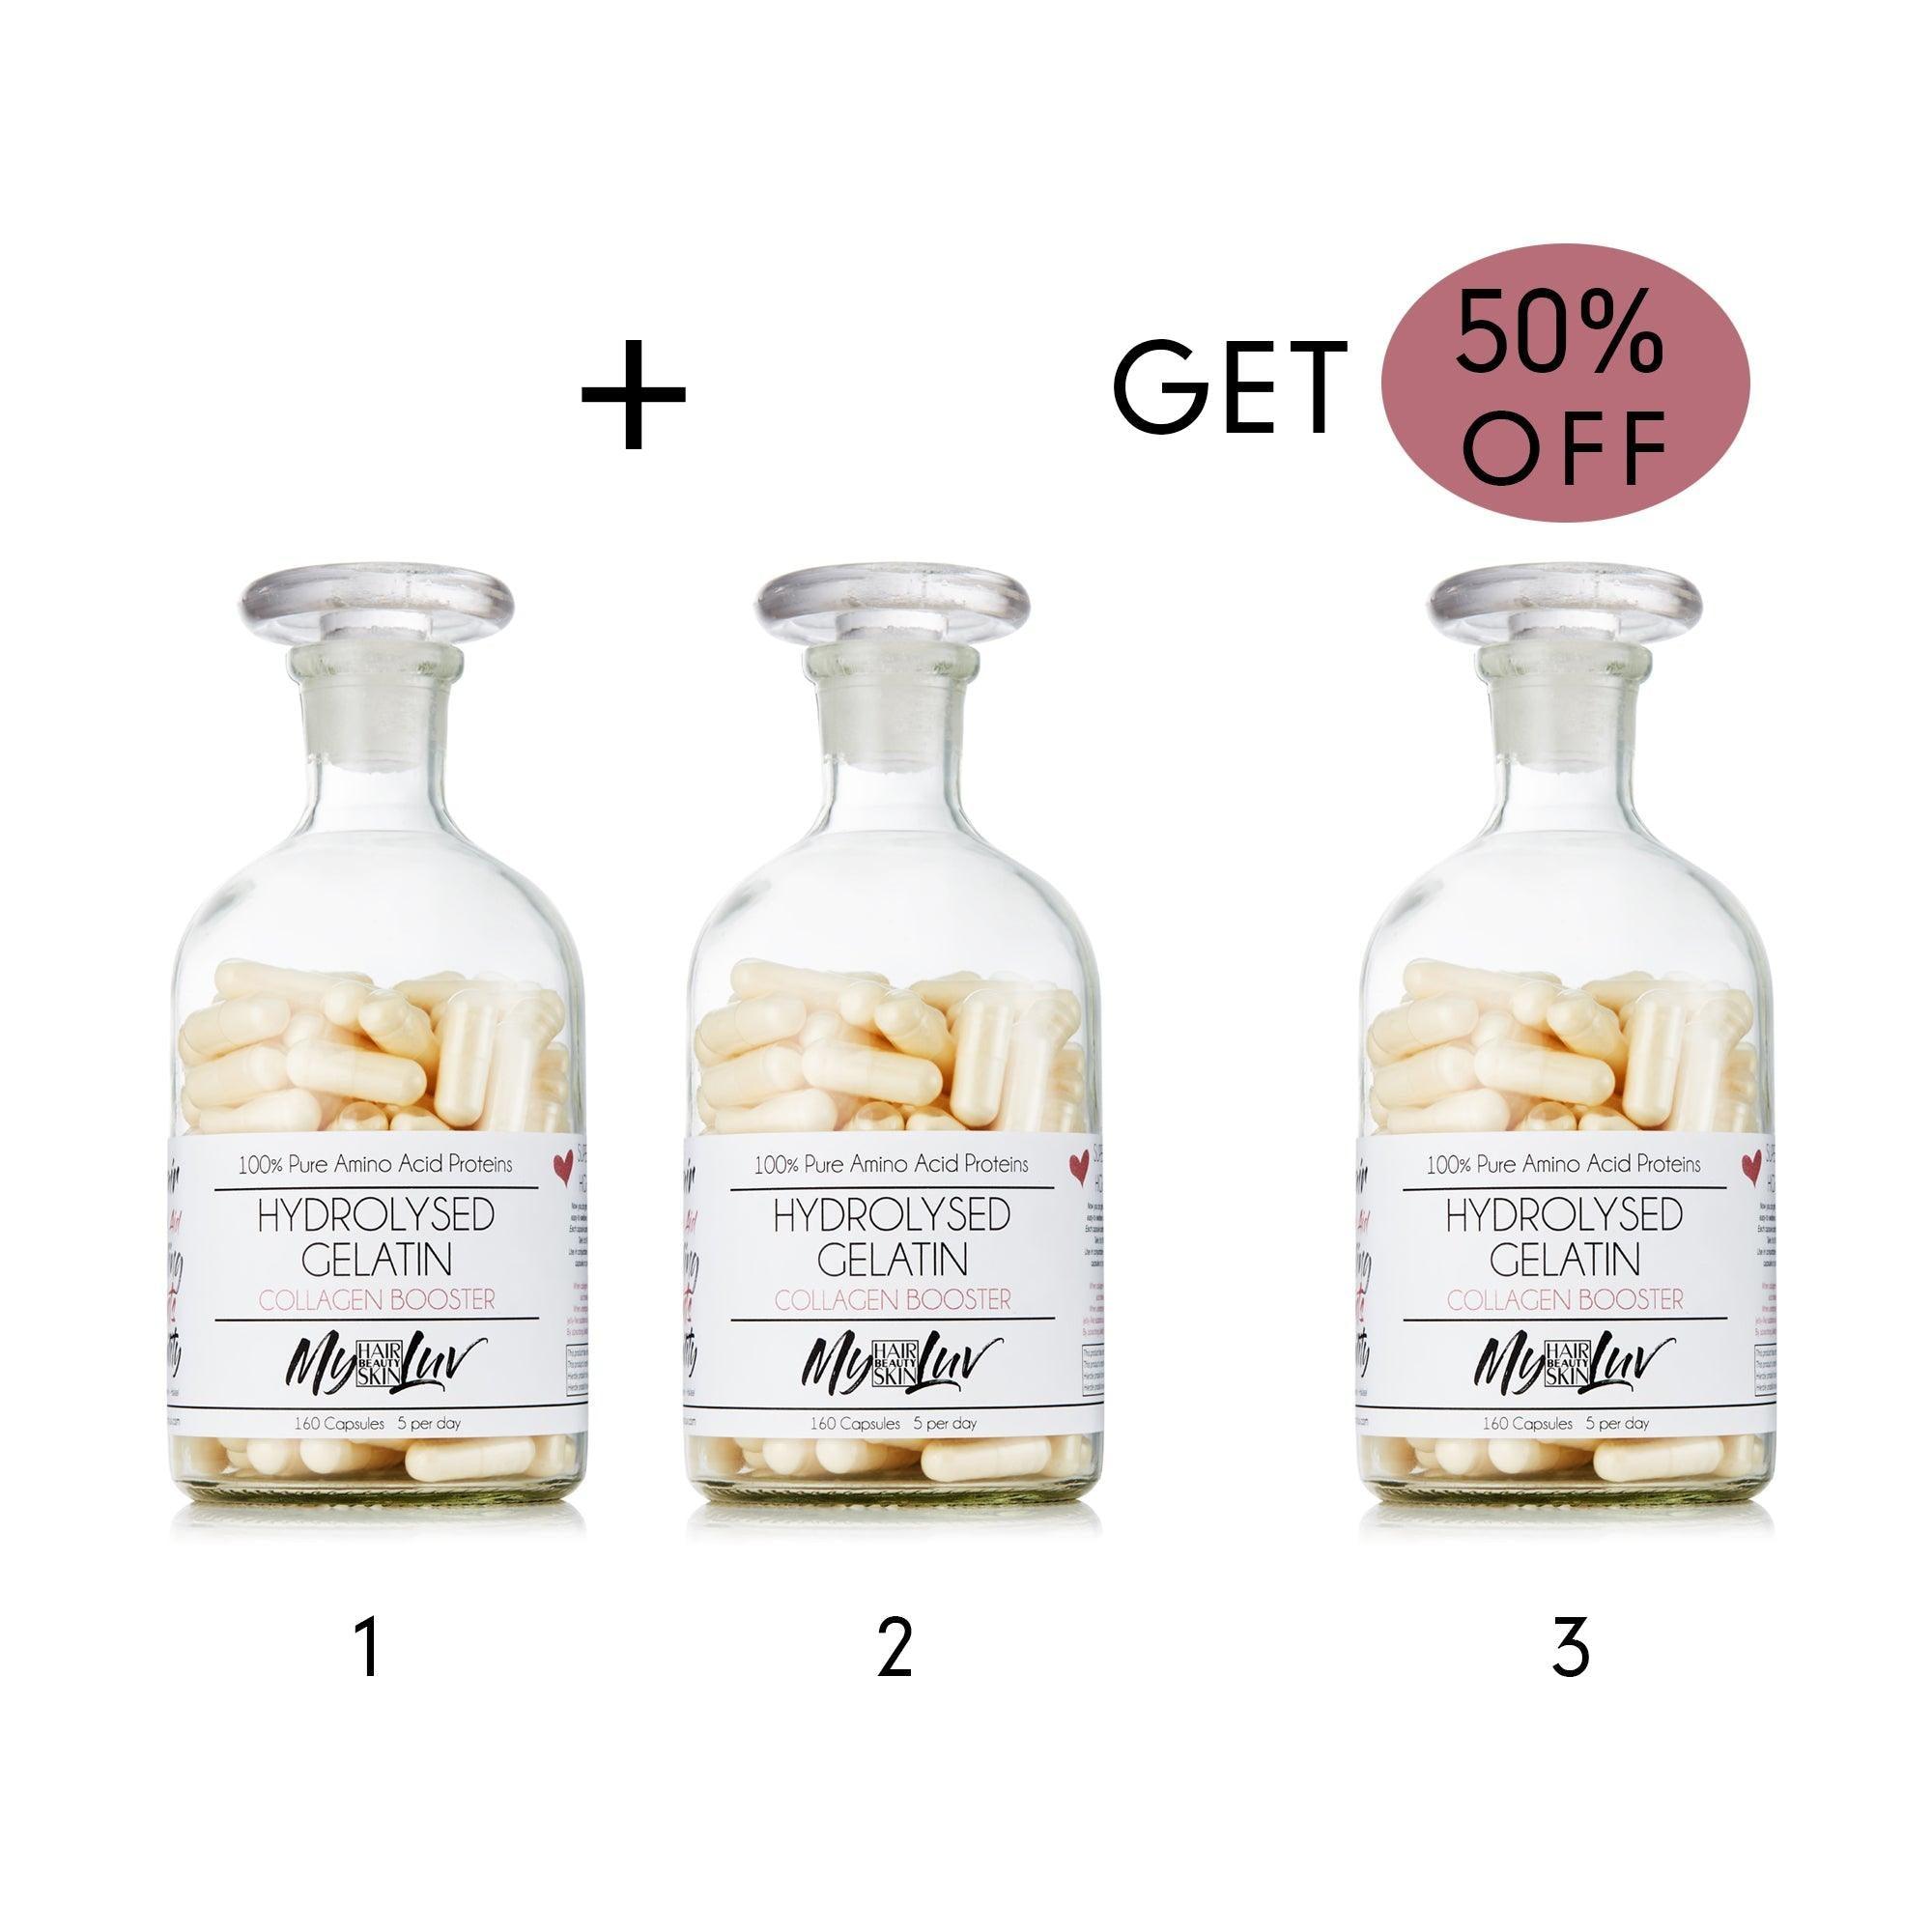 Full Body Collagen Booster Beauty Bundle Deal: BUY 2 GET 3rd at 50% OFF - My Beauty Luv